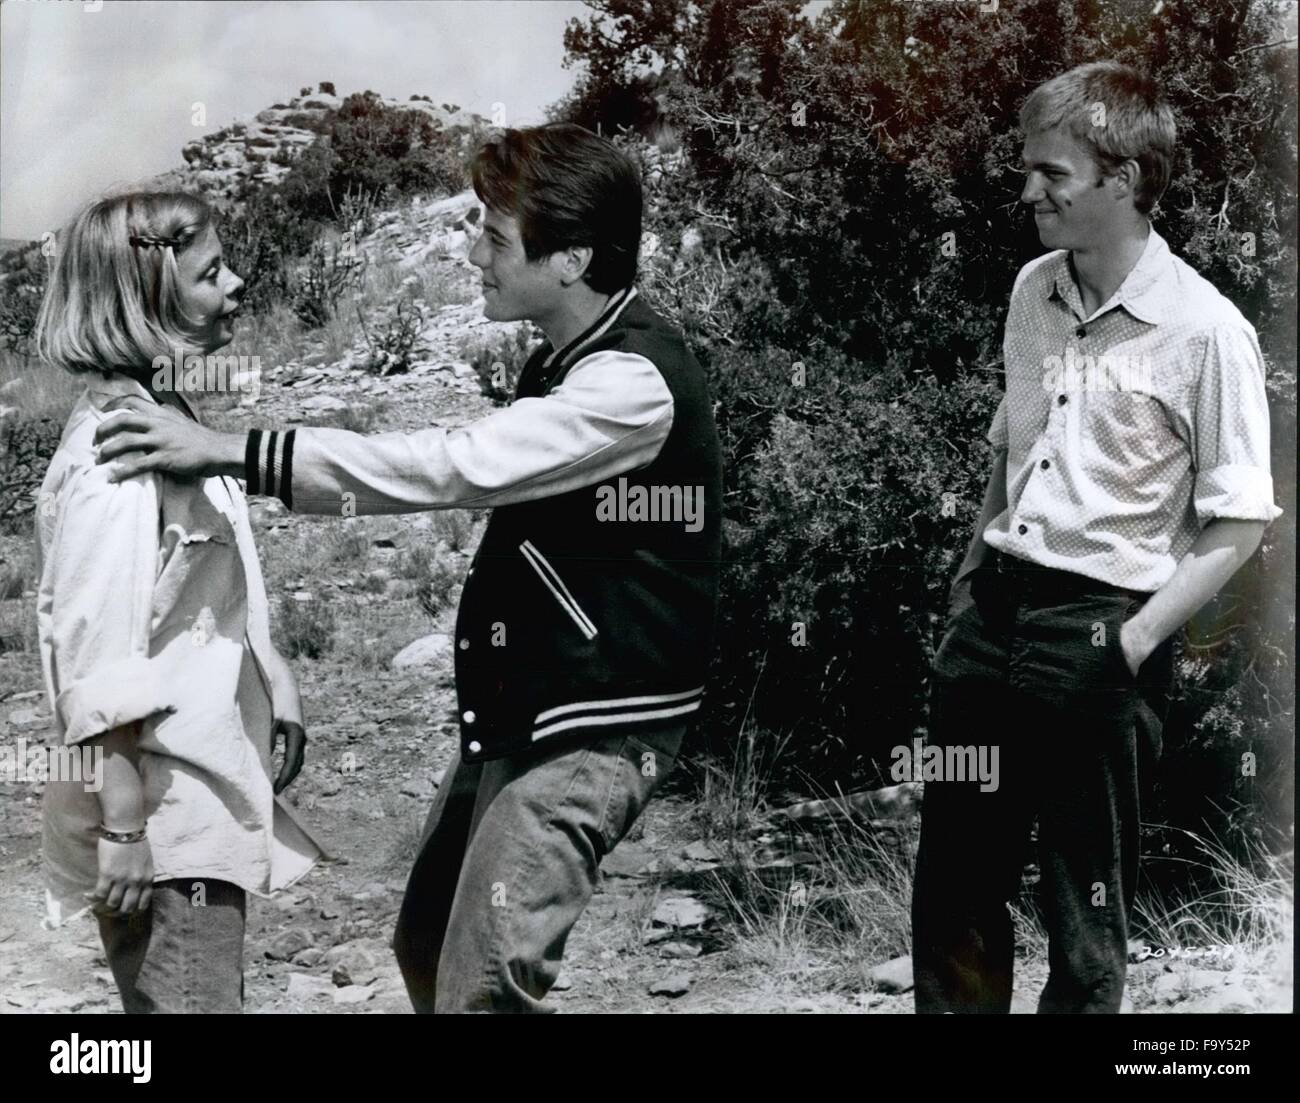 1968 - Richard Thomas and Catherine Bums watch anxiously as Desi Arnaz, Jr. gets ready for his turn at the game of Gallina, daring to run into the town dump and place his hand on the rotting carcass of a dead cow. A scene from Hal Wallis' Production in Technicolor of ''Red Sky At Morning'' for Universal, starring as the young ones Richard Thomas, Catherine Burns and Desi Amaz, Jr., and starring as the adults Richard Crenna, Claire Bloom, John Colicos, Harry Guardino, Strother Martin and Nehemiah Persoff. James Goldstone directed the film version of Richard Bradford's best-selling novel from a  Stock Photo